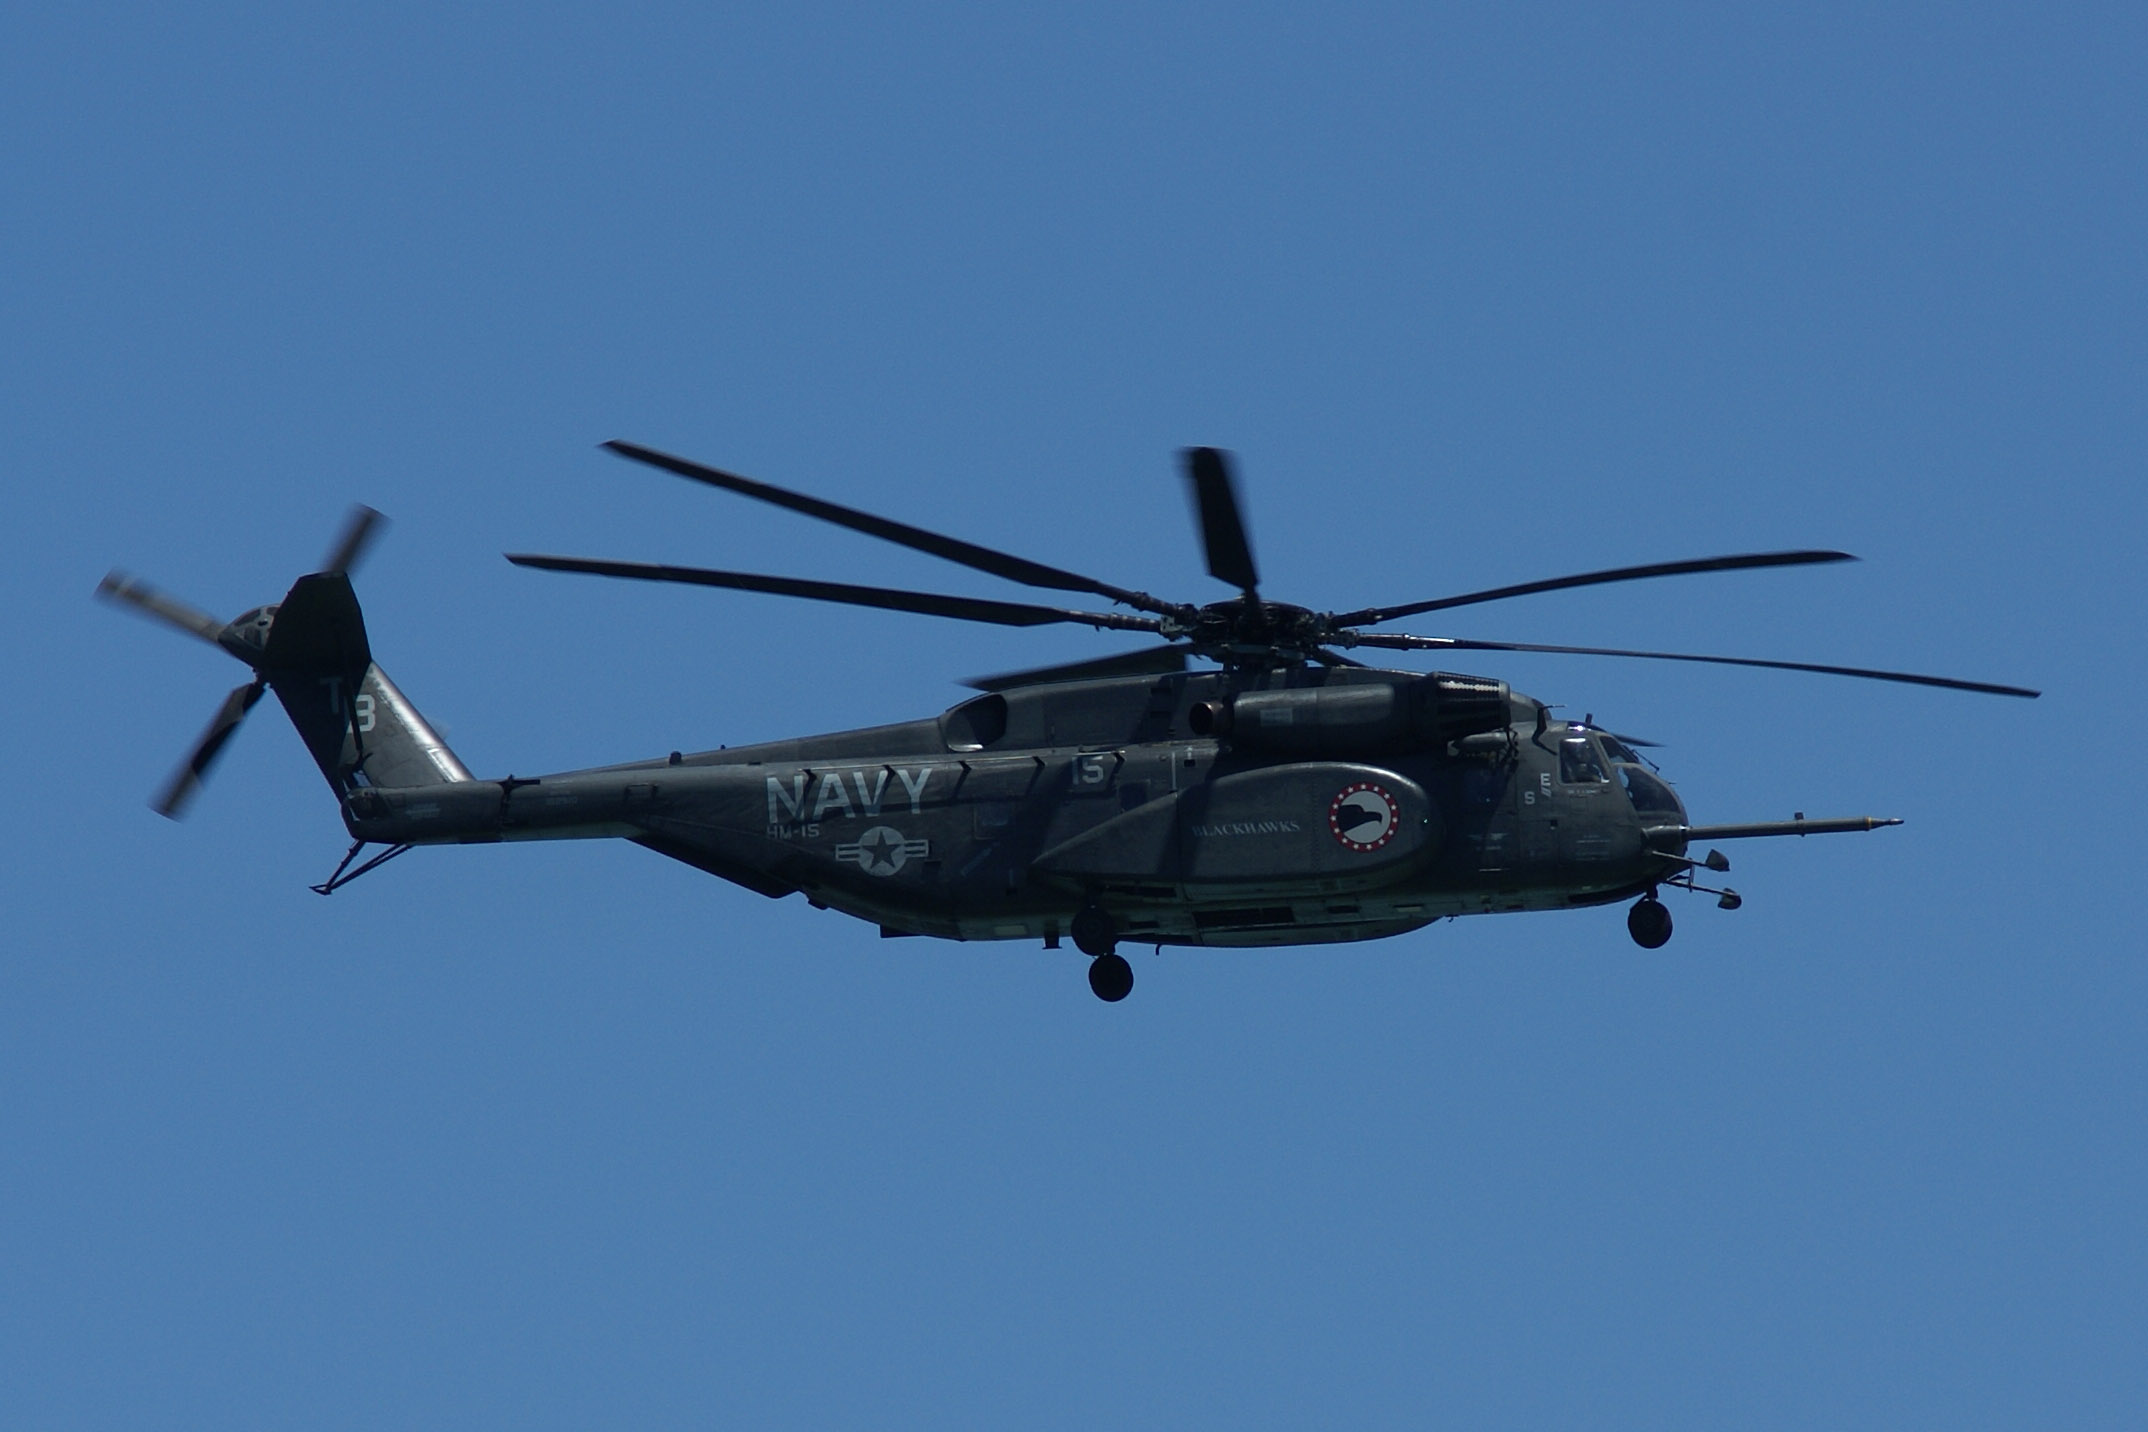 an army helicopter flying in a clear blue sky